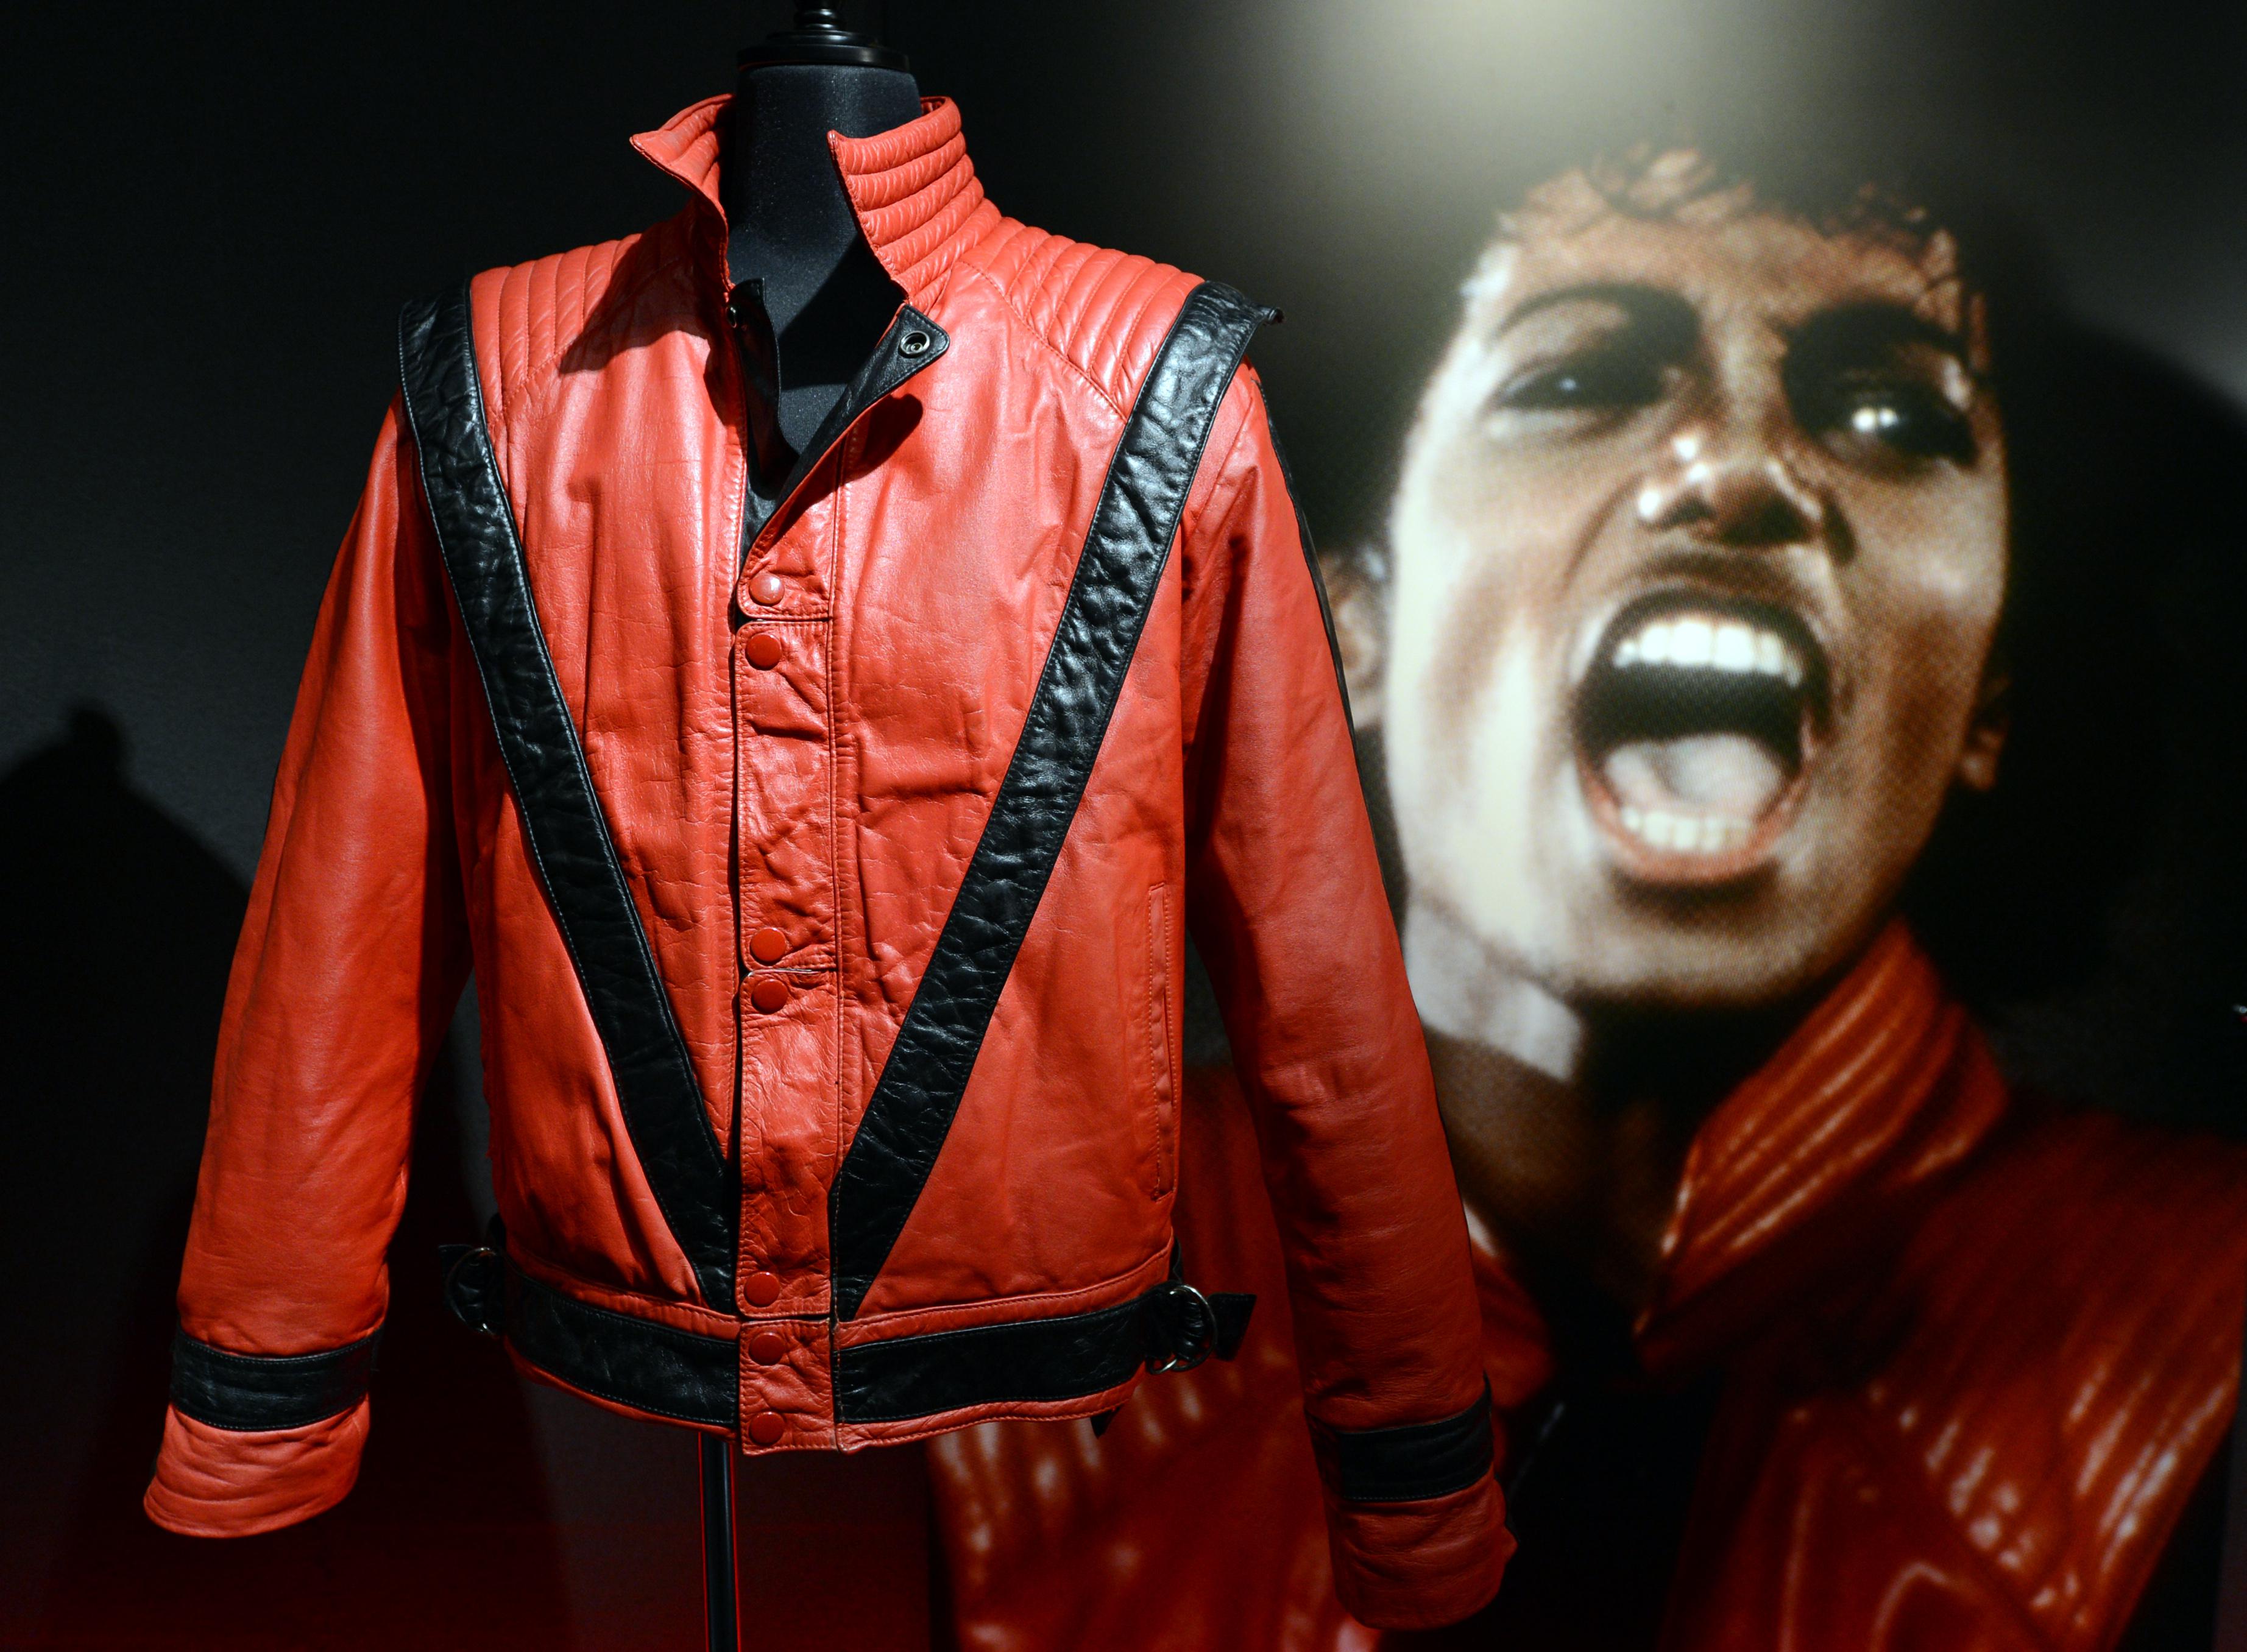 Michael Jacksons Thriller jacket sells for 11million at auction  Daily  Mail Online